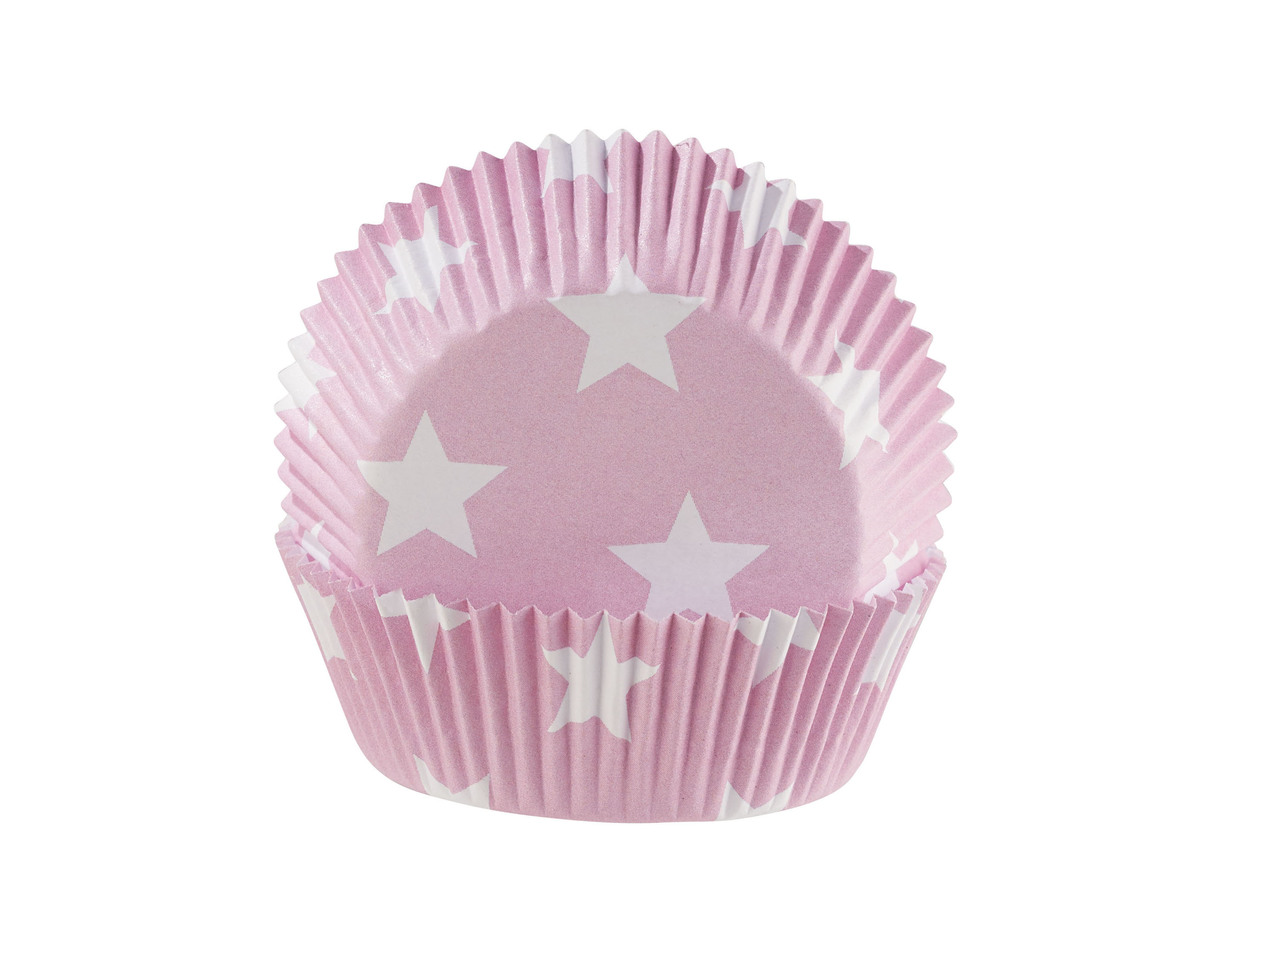 Cake Dolies or Cupcakes Cases